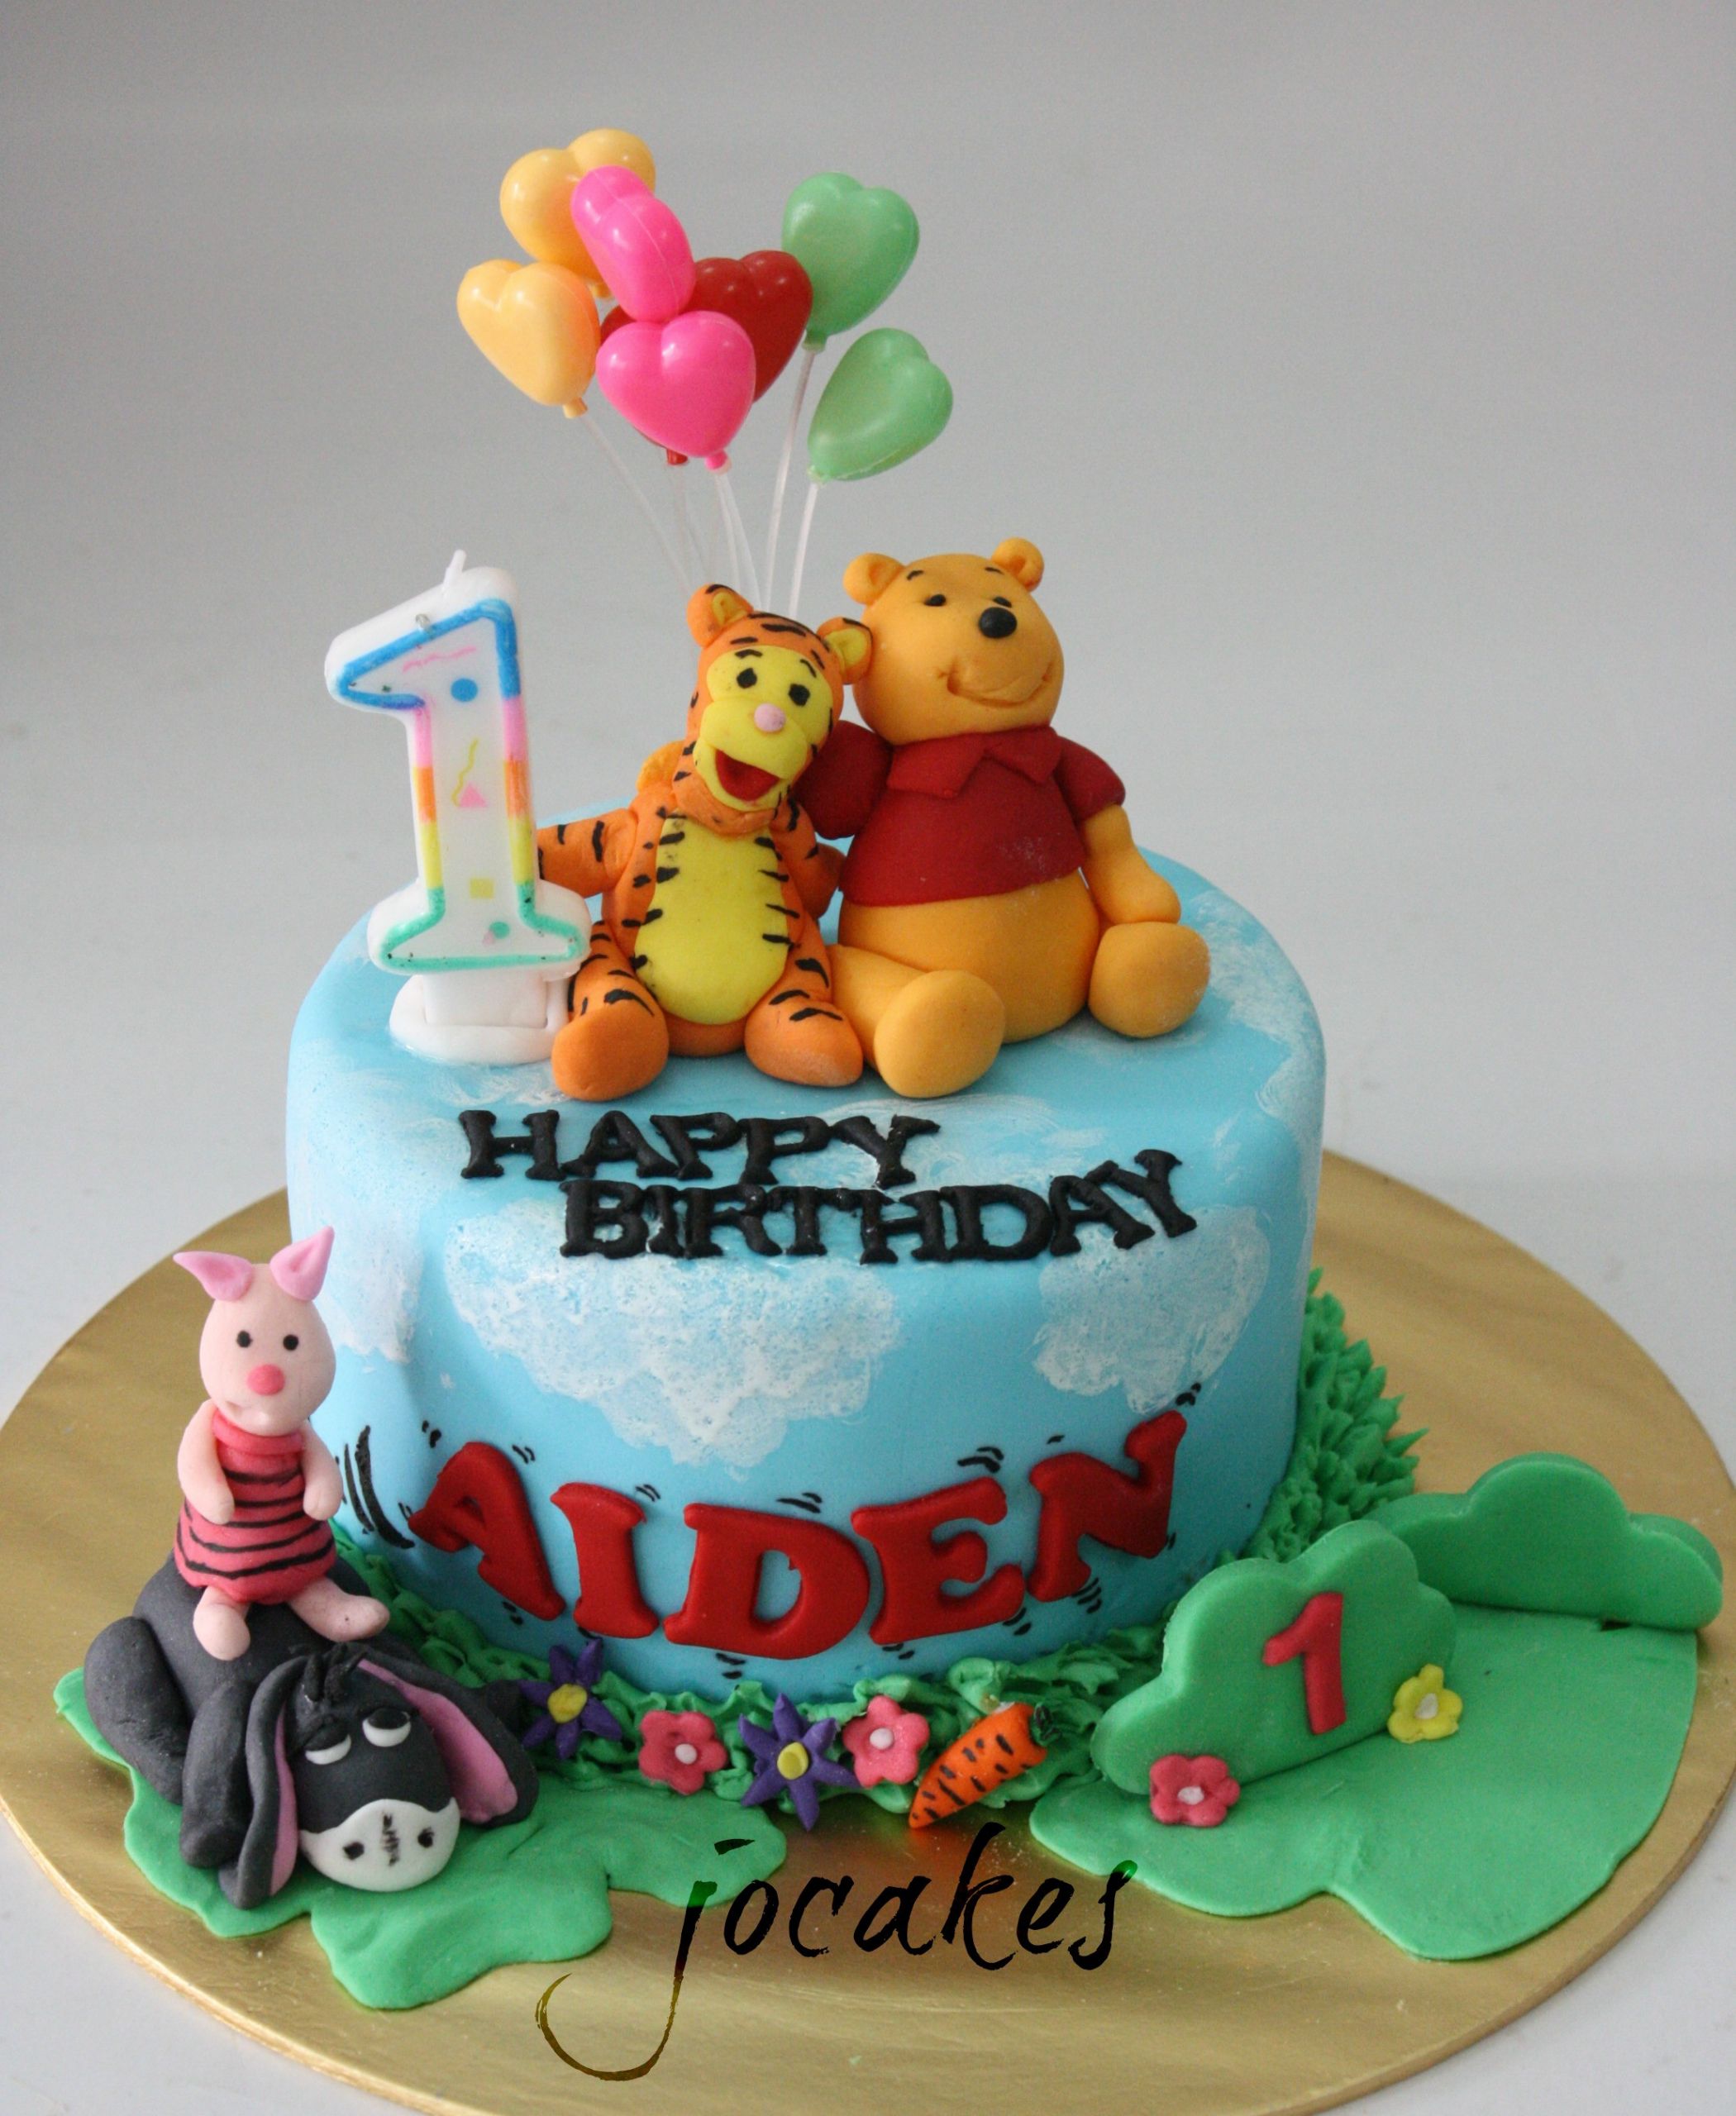 Boy Birthday Cakes
 Winnie the Pooh and friends cake for 1 year old boy Aiden